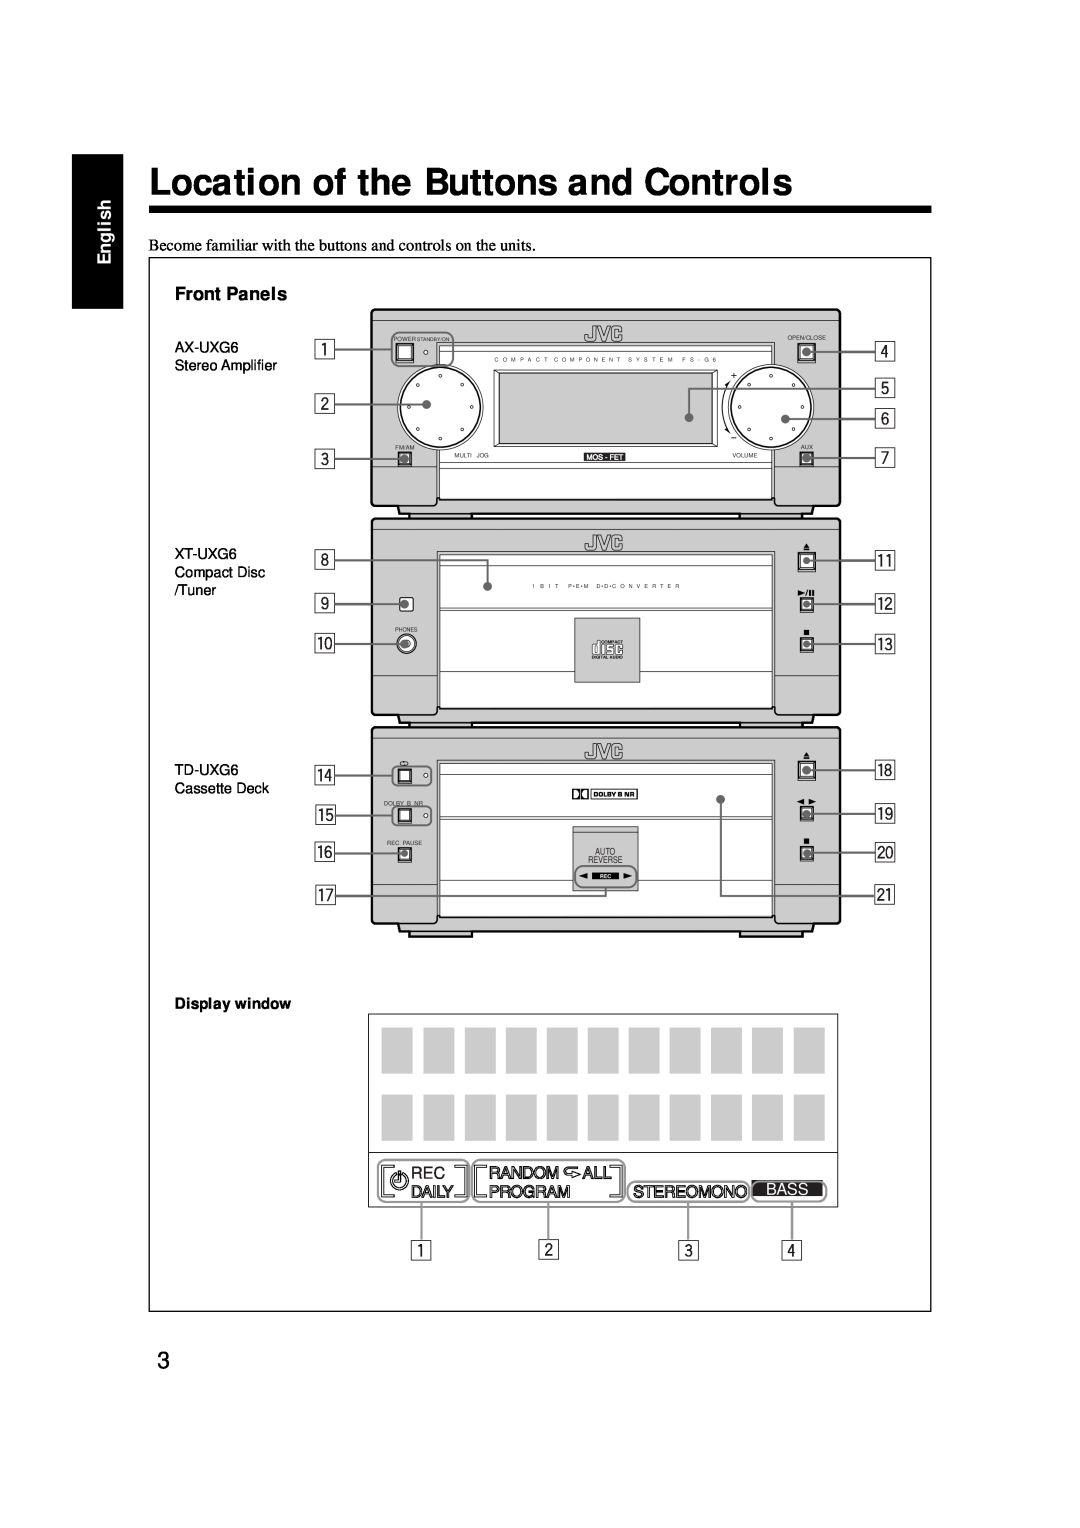 JVC XT-UXG6, LVT0375-001A, FS-G6 manual Location of the Buttons and Controls, Front Panels, English 